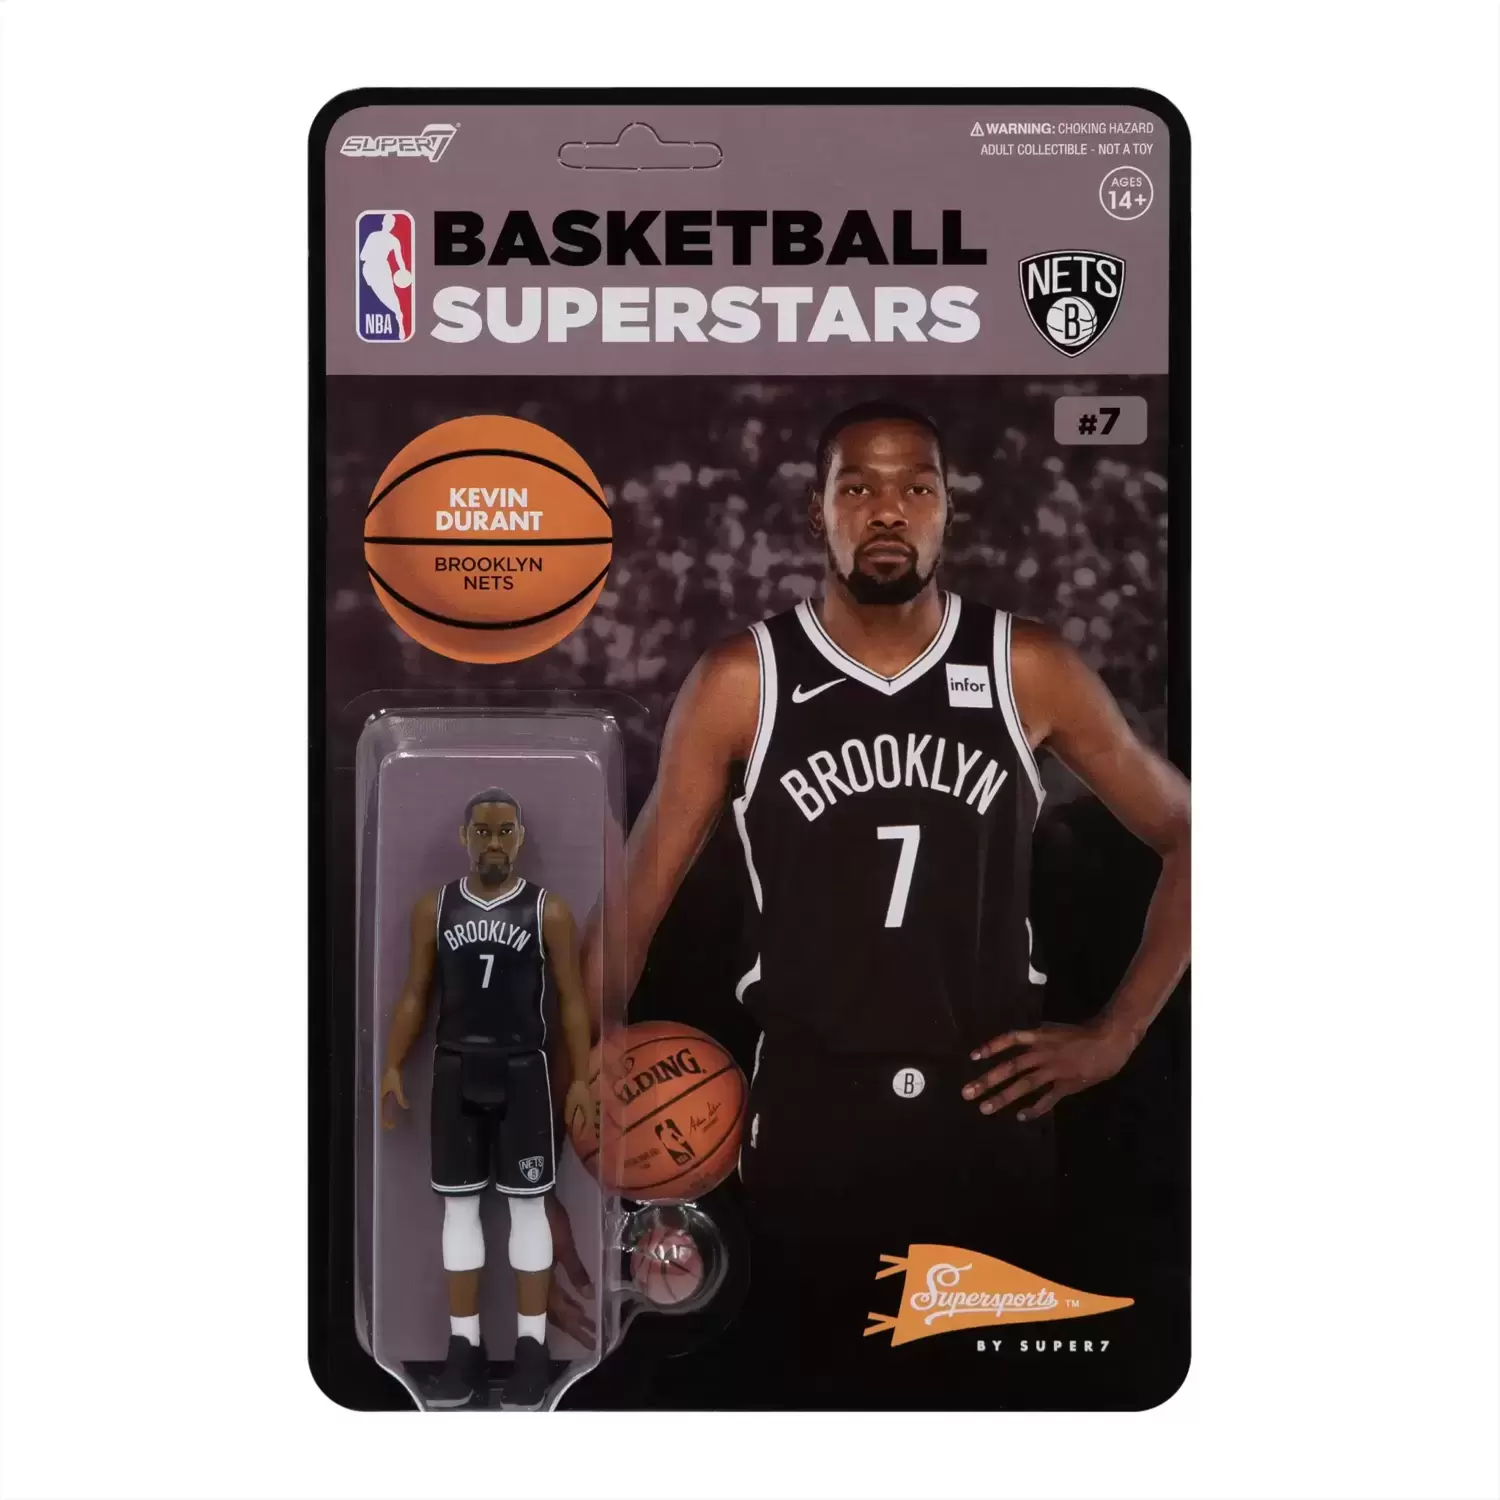 Supersports by Super7 - Basketball - Kevin Durant (Nets)